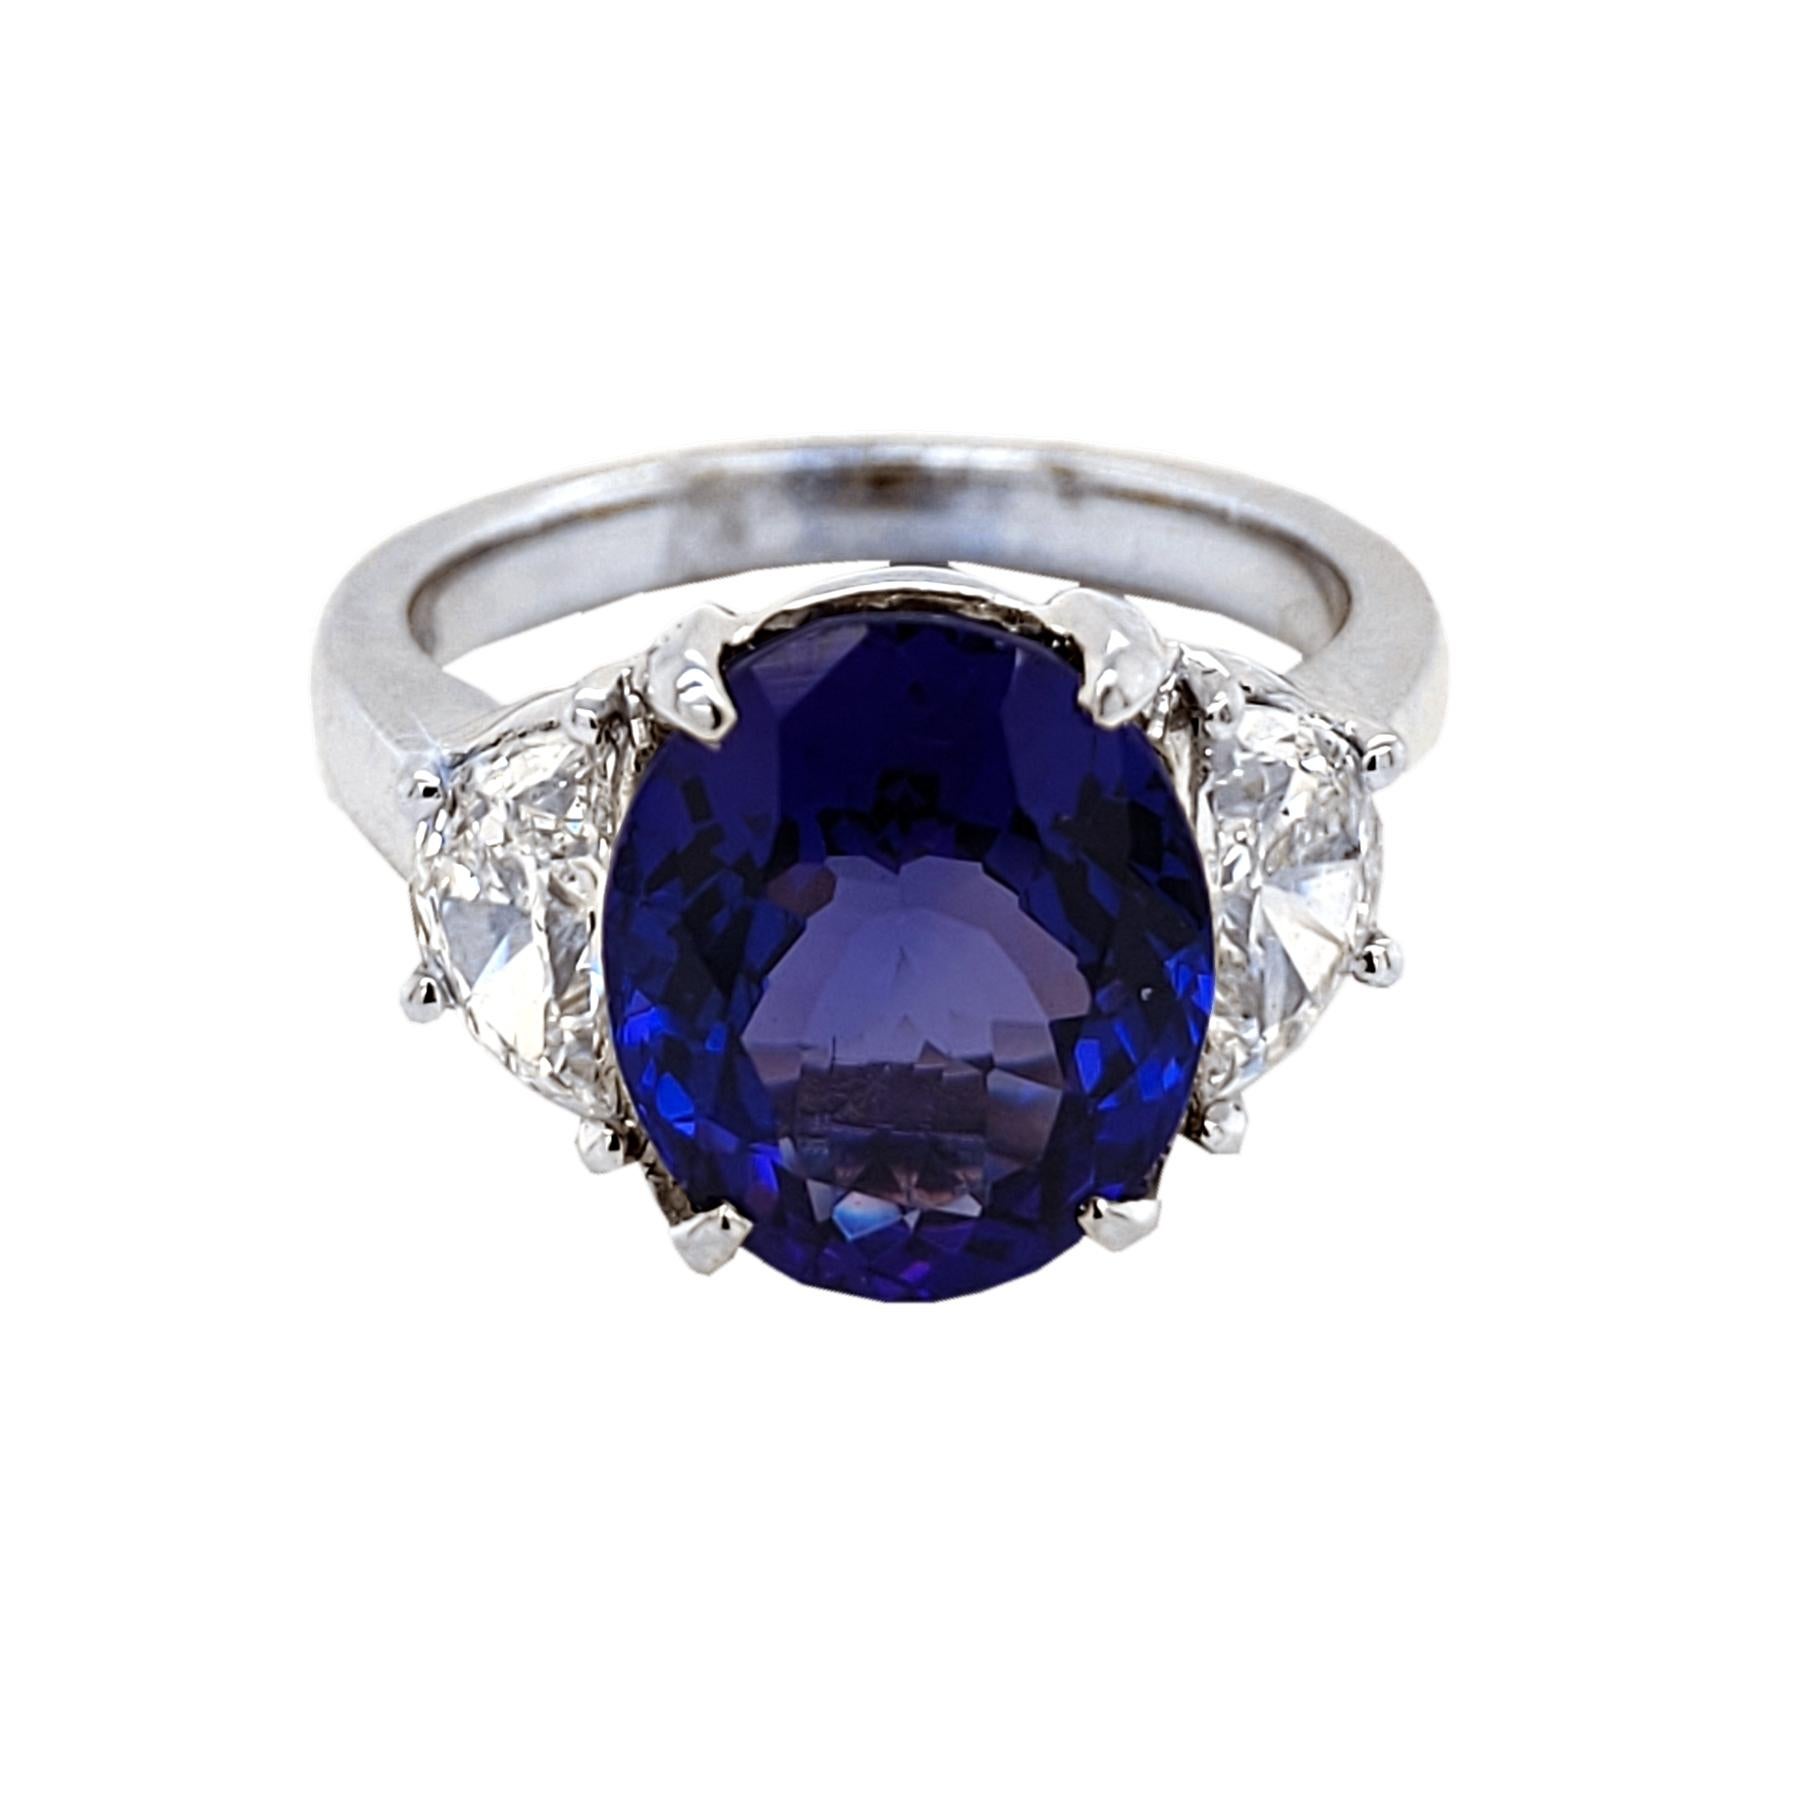 Contemporary 4.47 Carat Oval Tanzanite 3 Stone 'Half Moon' Diamonds Engagement Ring For Sale